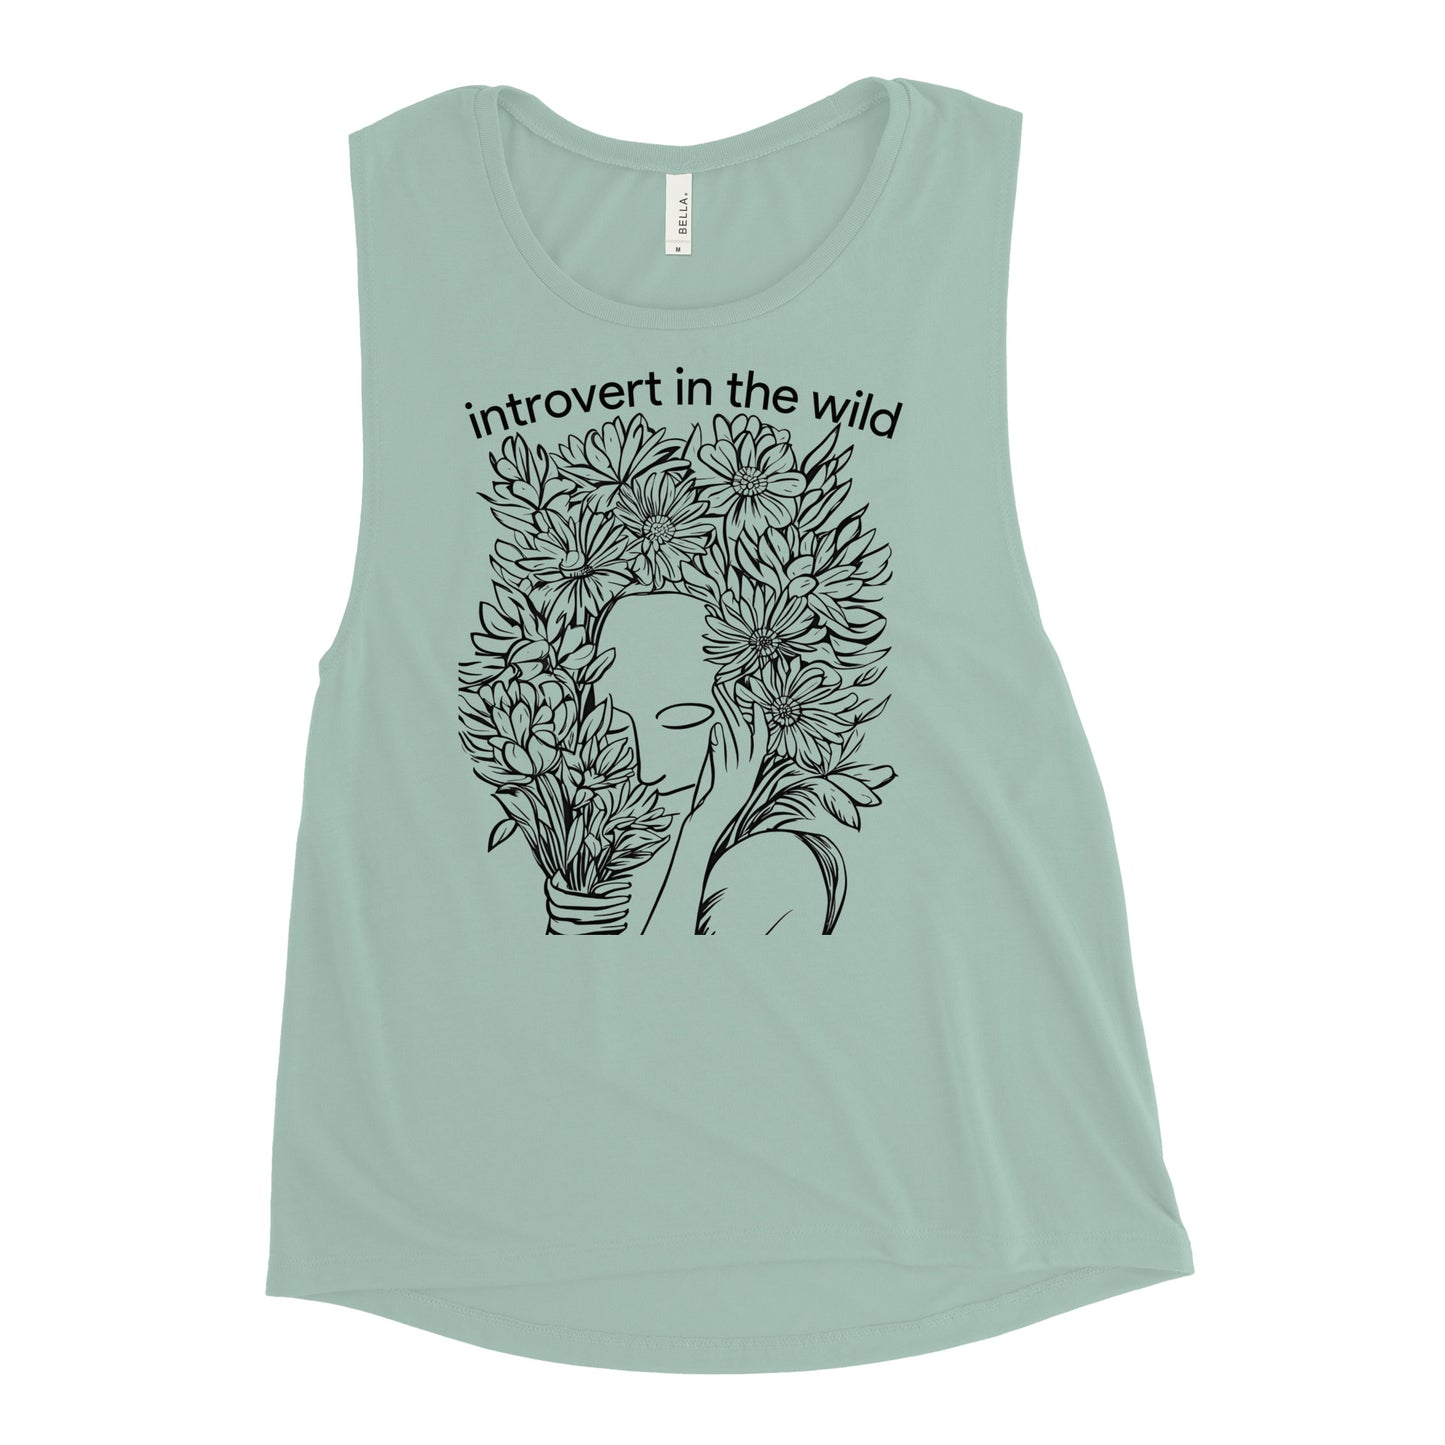 Introvert in the Wild Ladies’ Muscle Tank